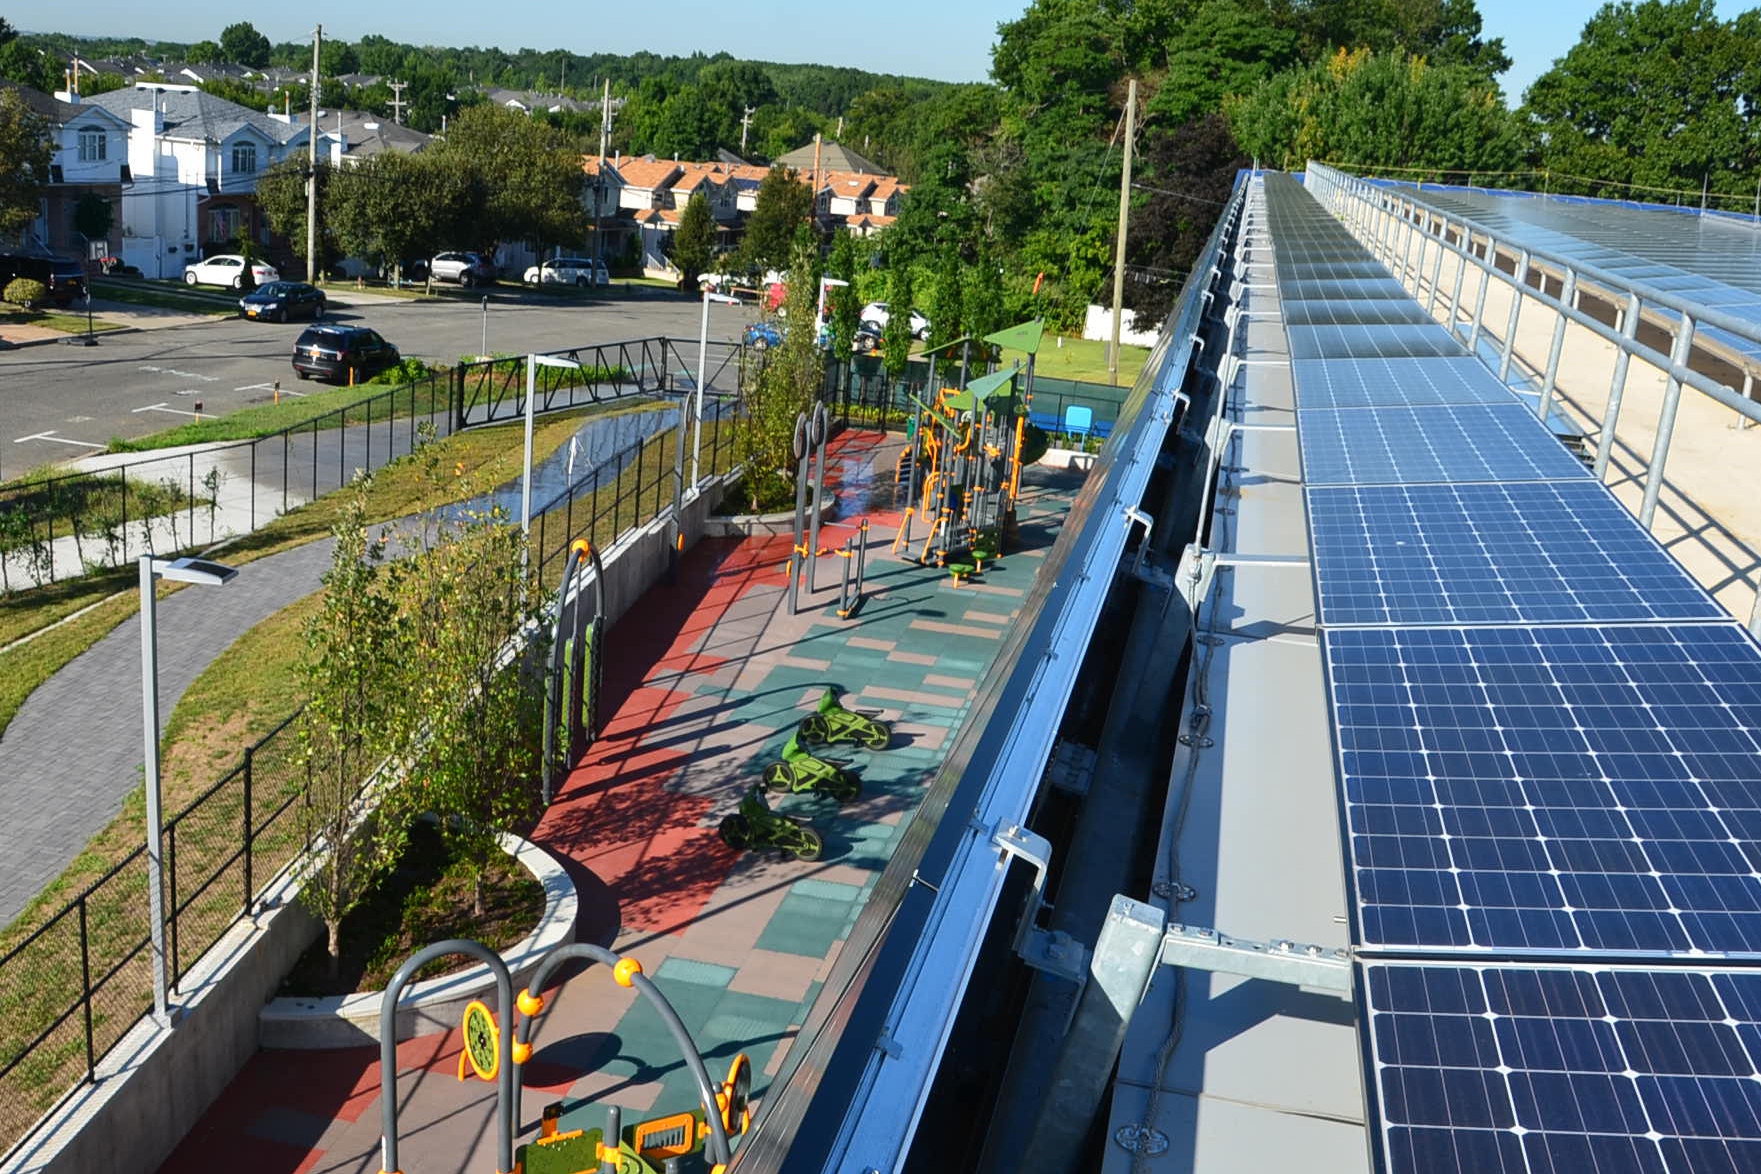 PV Panels Over the Playground